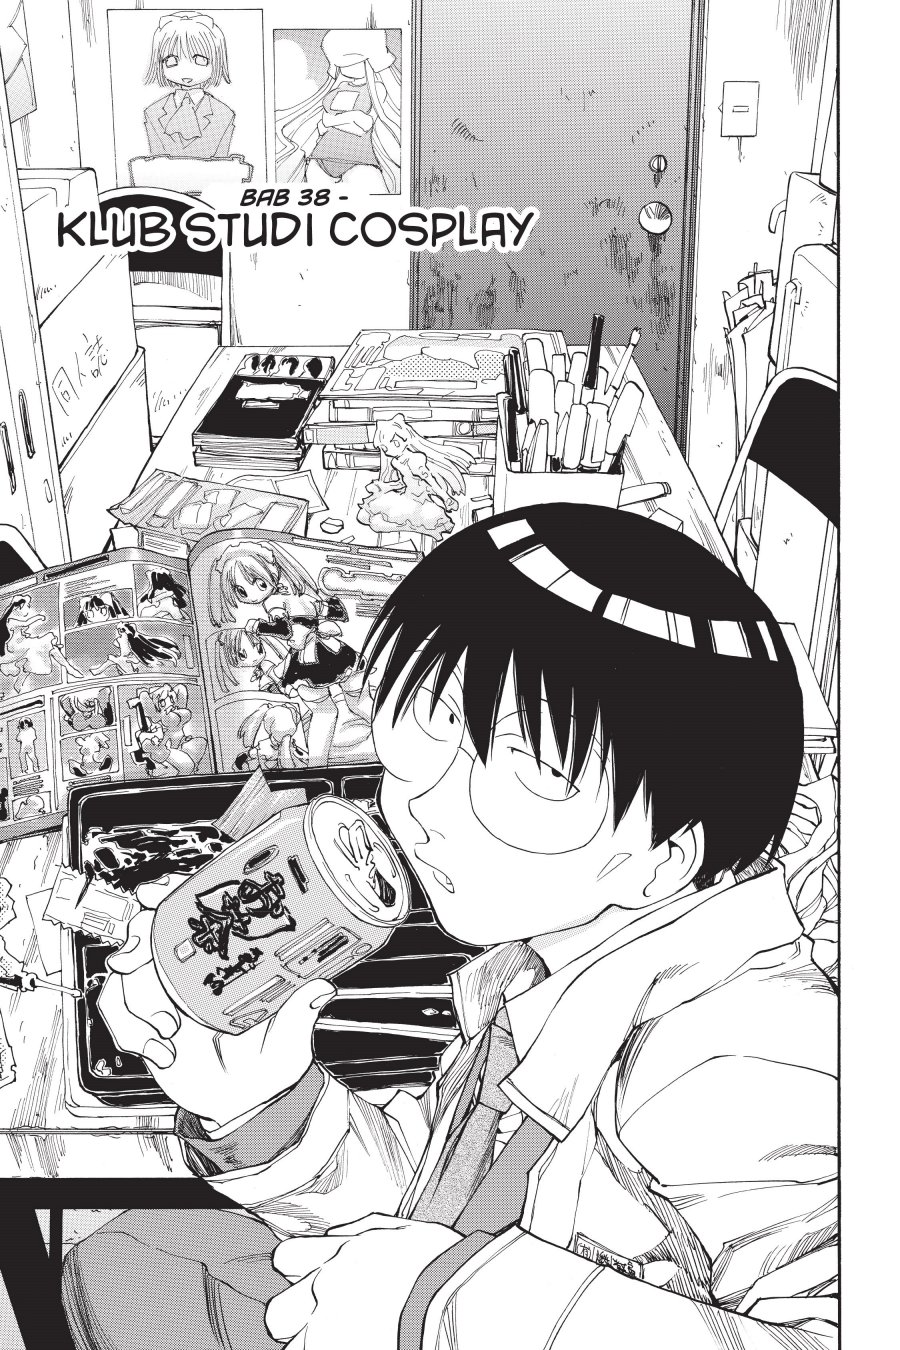 Genshiken – The Society for the Study of Modern Visual Culture Chapter 38 Image 2